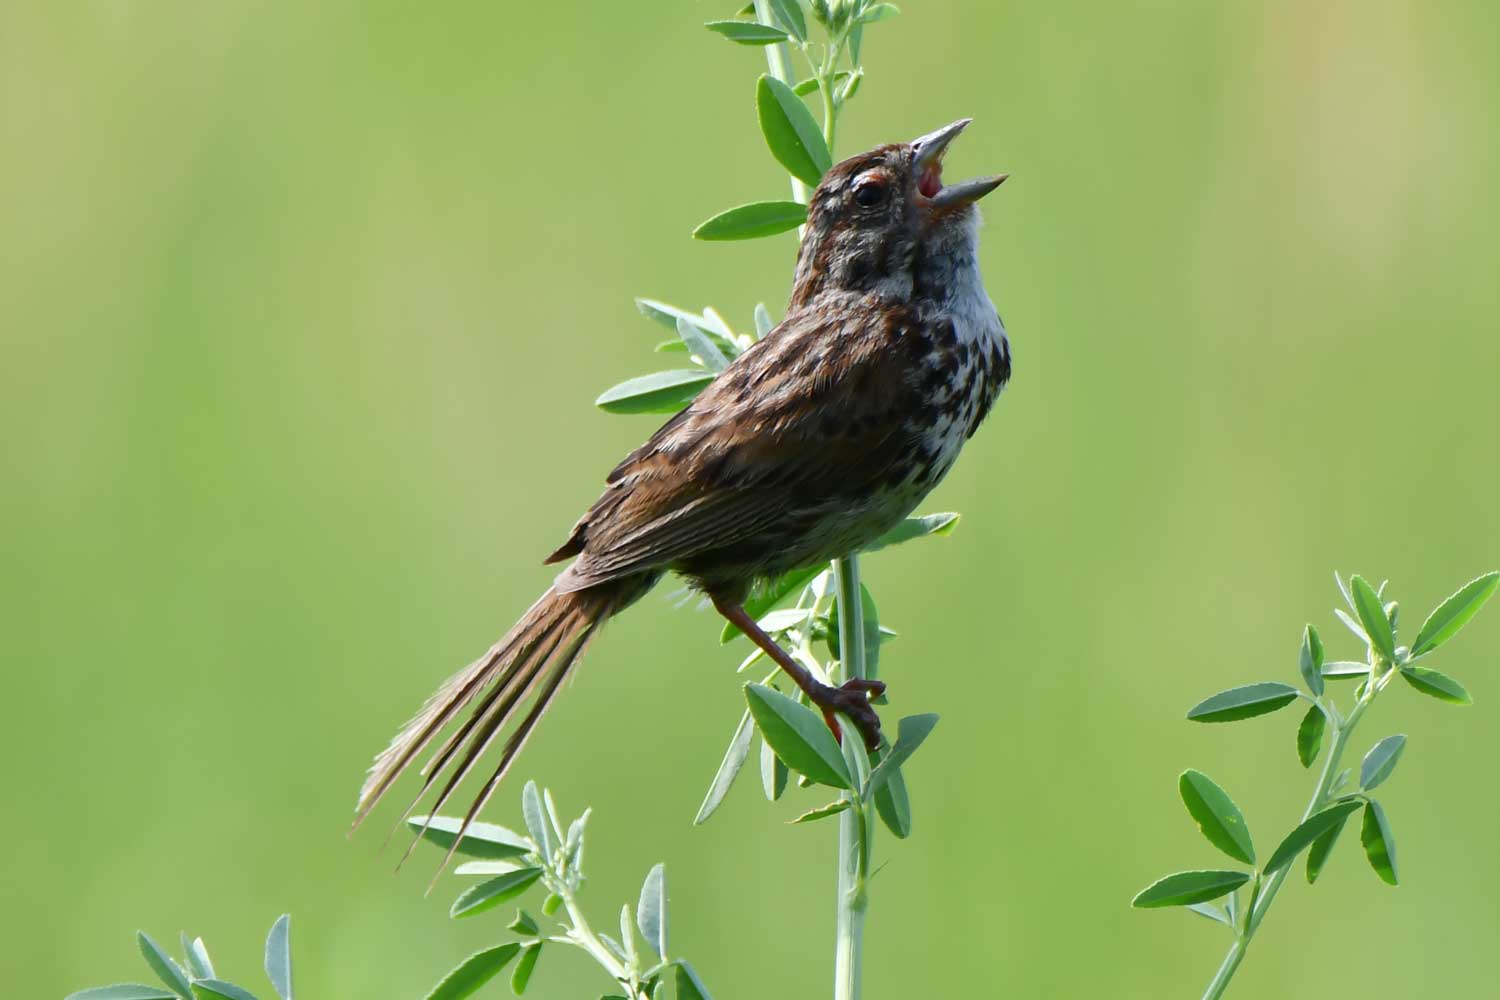 Female red-winged blackbird perched atop vegetation.